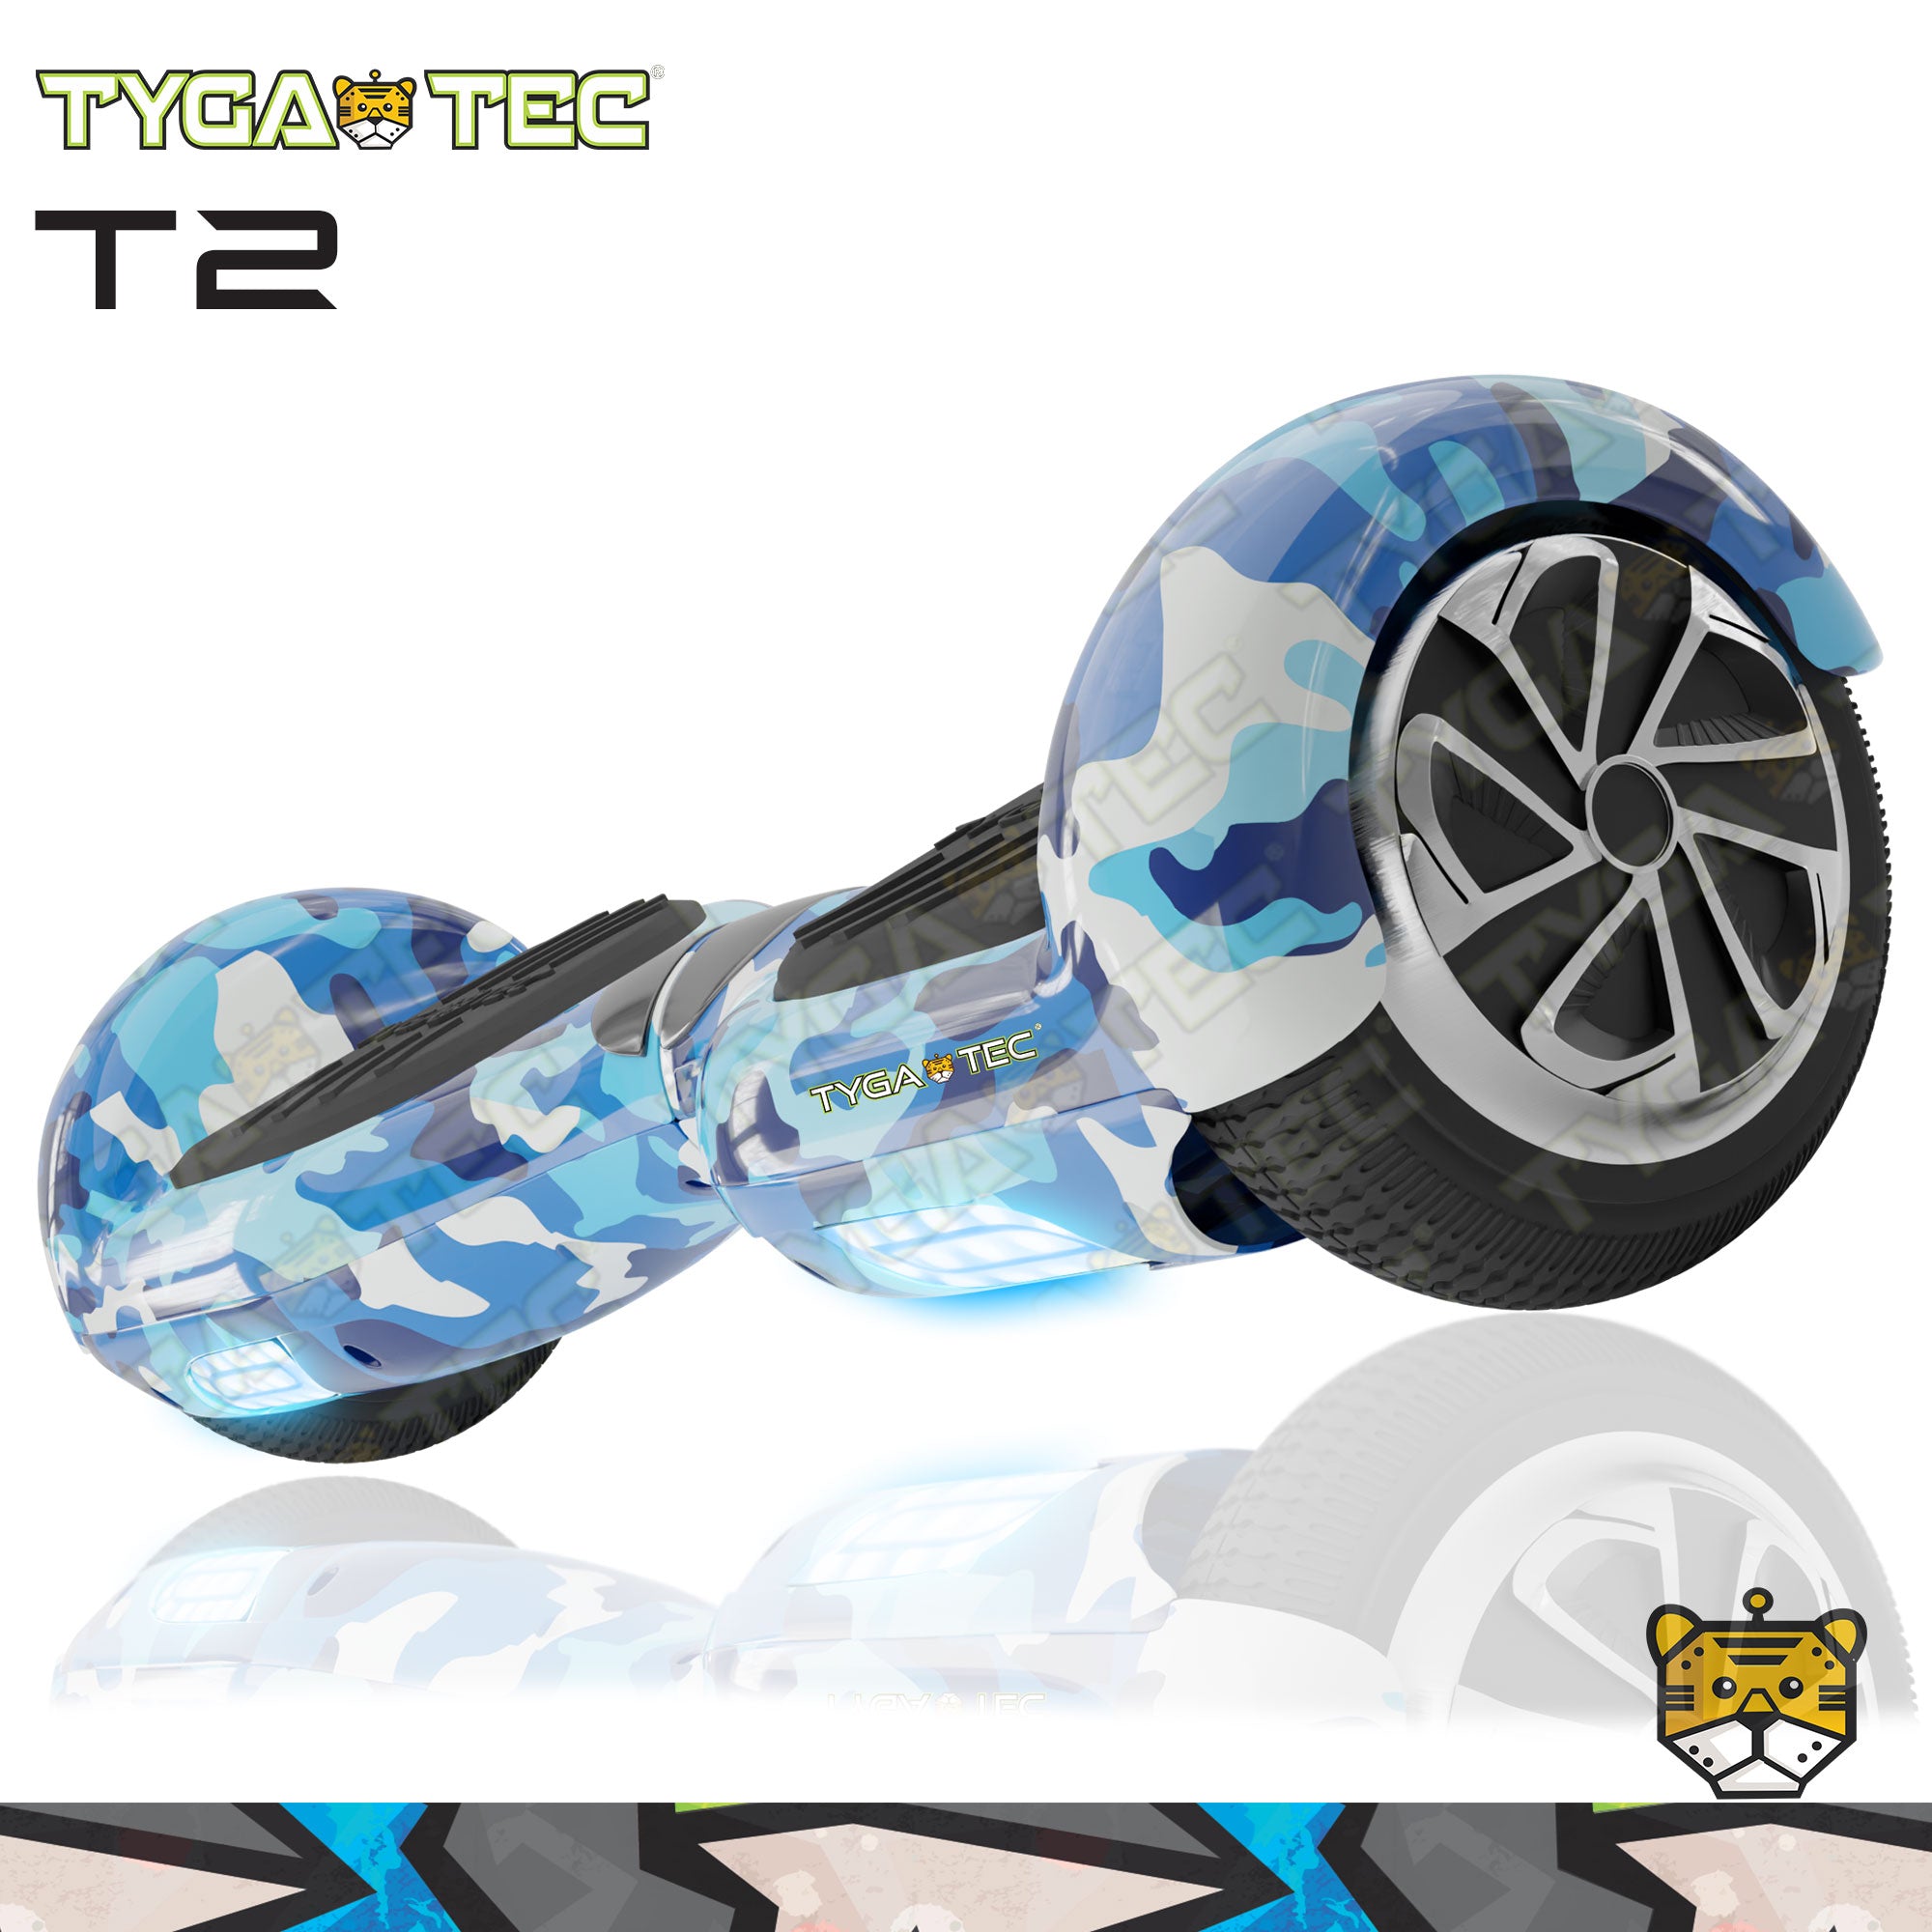 TYGATEC T2 + Auto Balancing Hoverboard App Connectivity - Military Blue